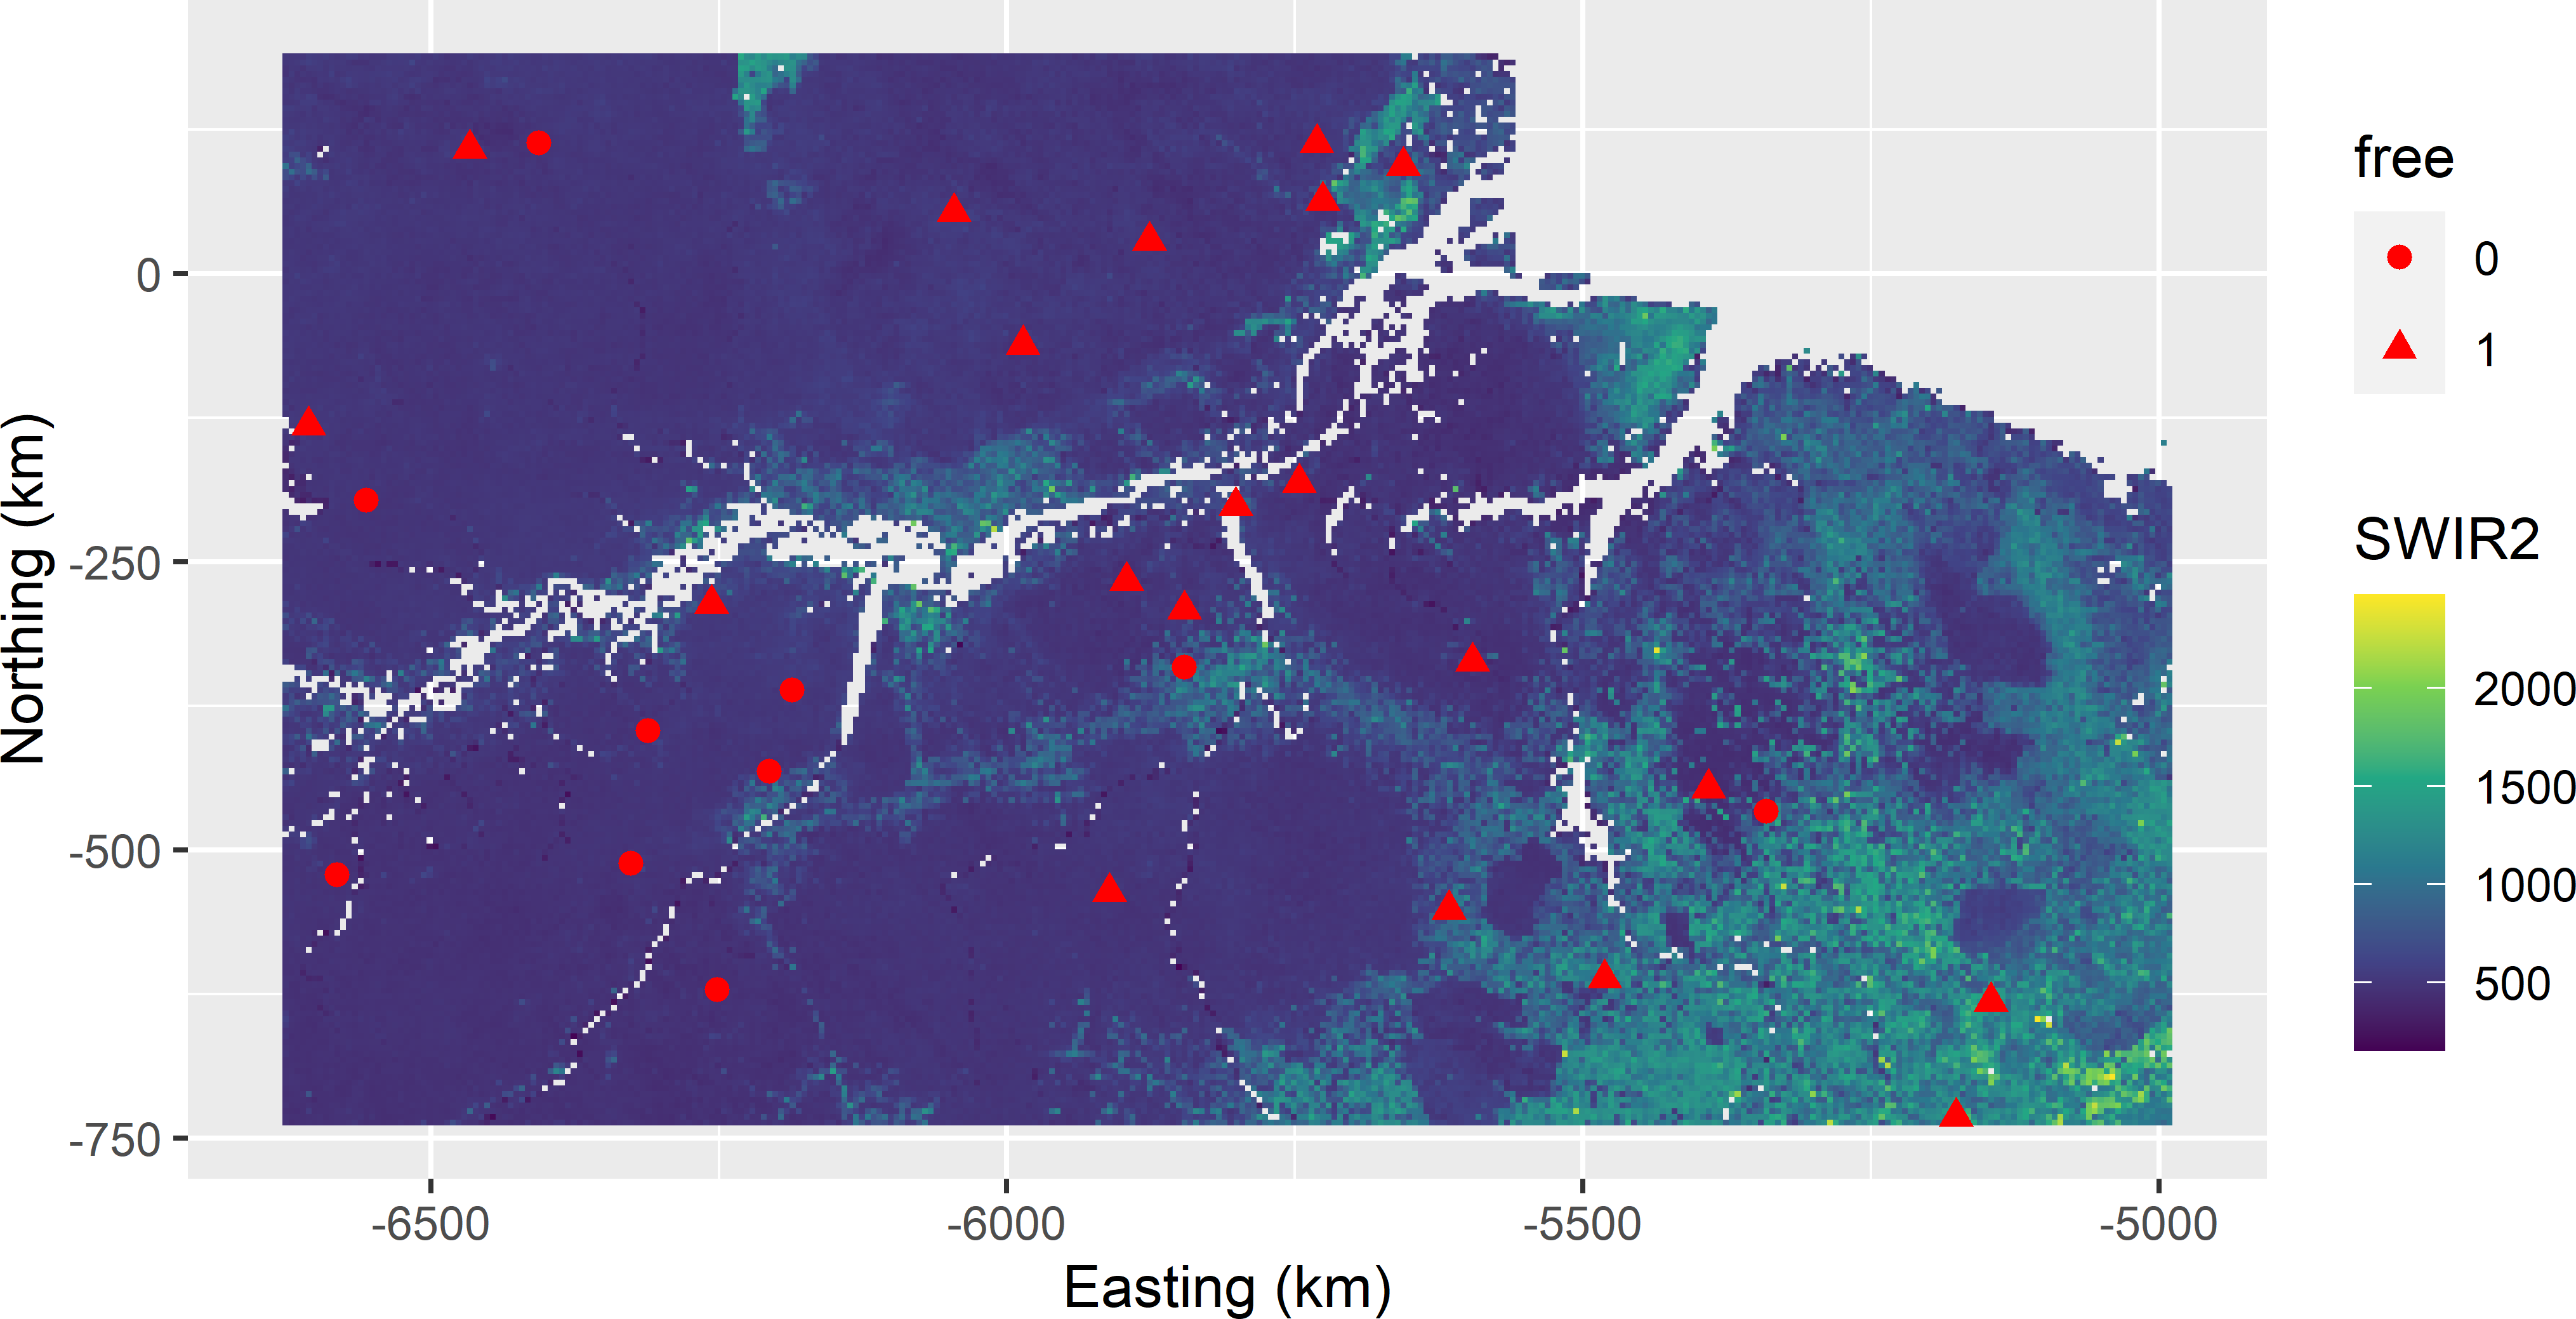 Conditioned Latin hypercube infill sample from Eastern Amazonia in a map of SWIR2. Legacy units have free-value 0; infill units have free-value 1.